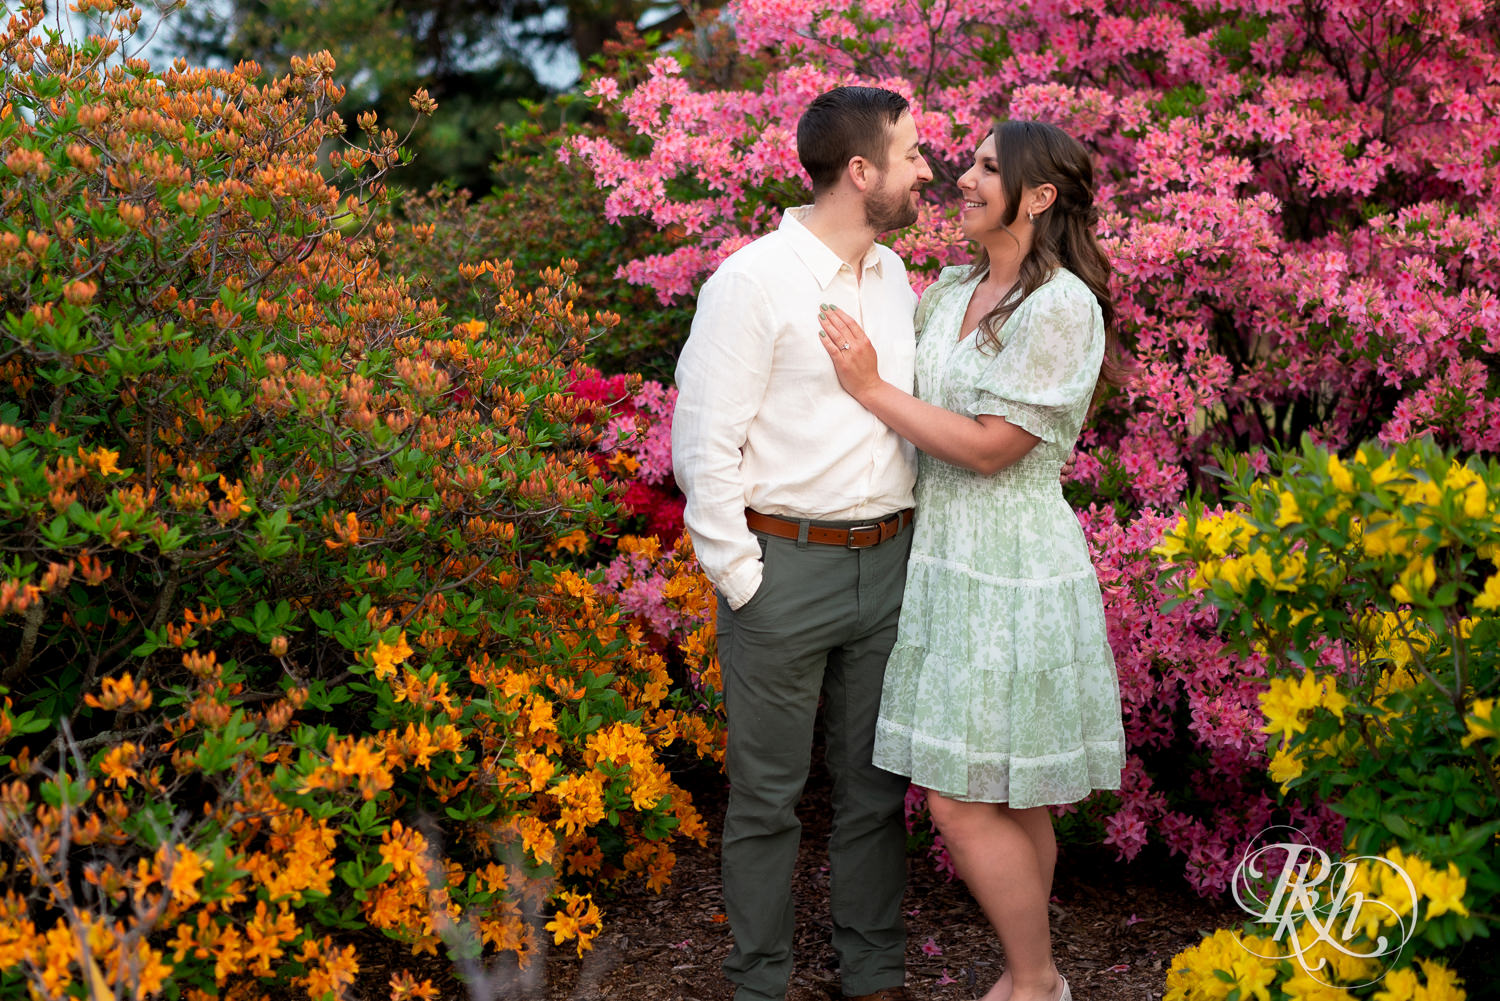 Man in white shirt and woman in green dress smile in front of flowers at the Minnesota Landscape Arboretum in Chaska, Minnesota.